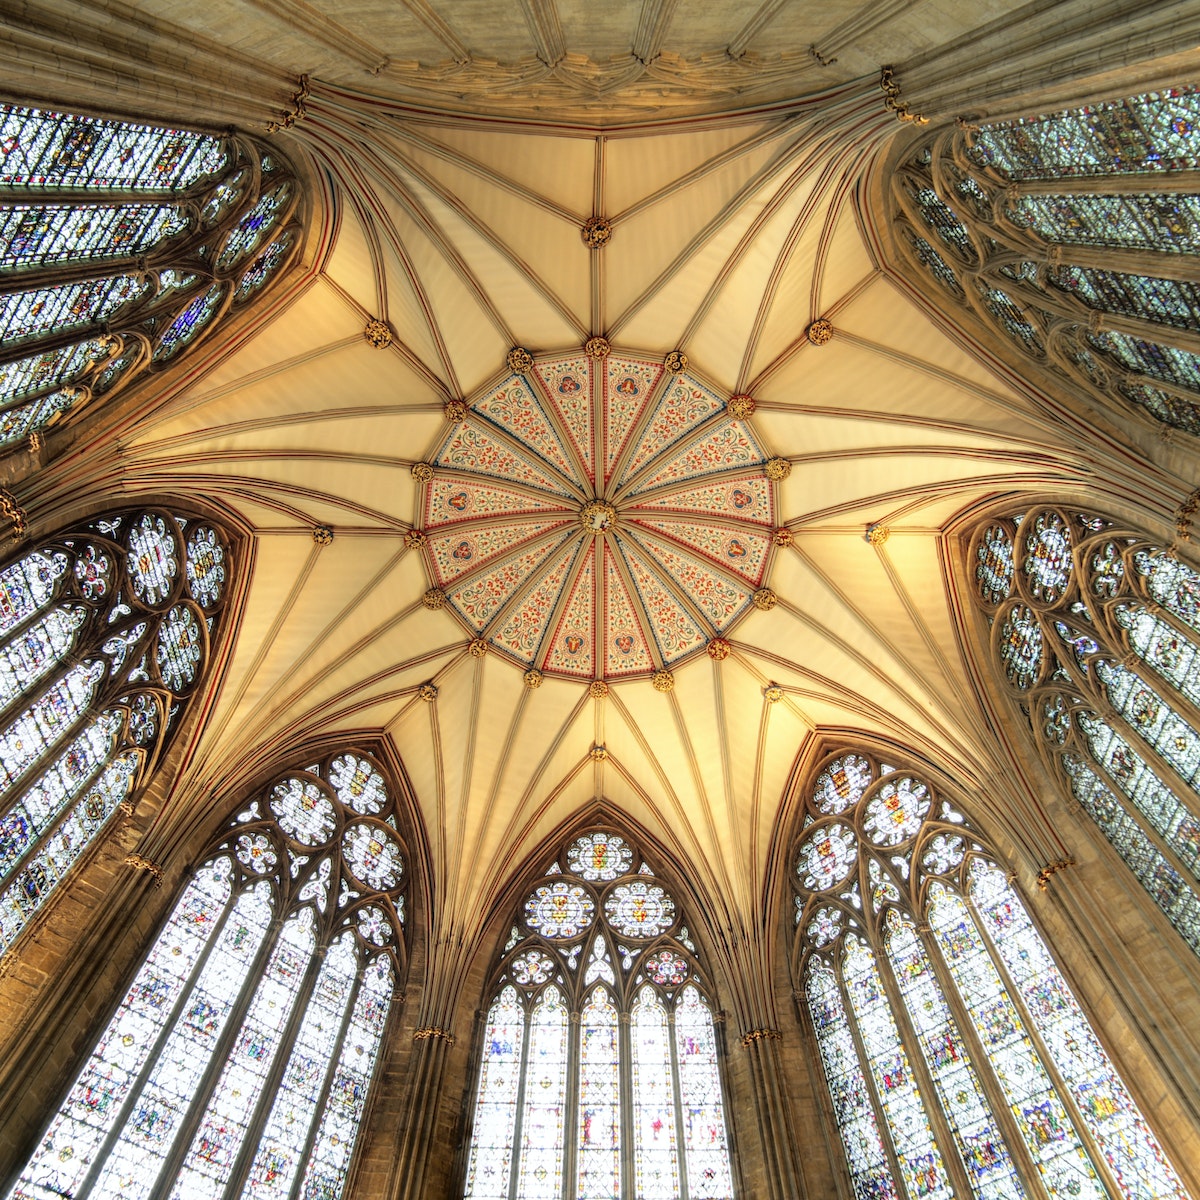 UK, England, North Yorkshire, York, York Minster, ceiling of chapter house